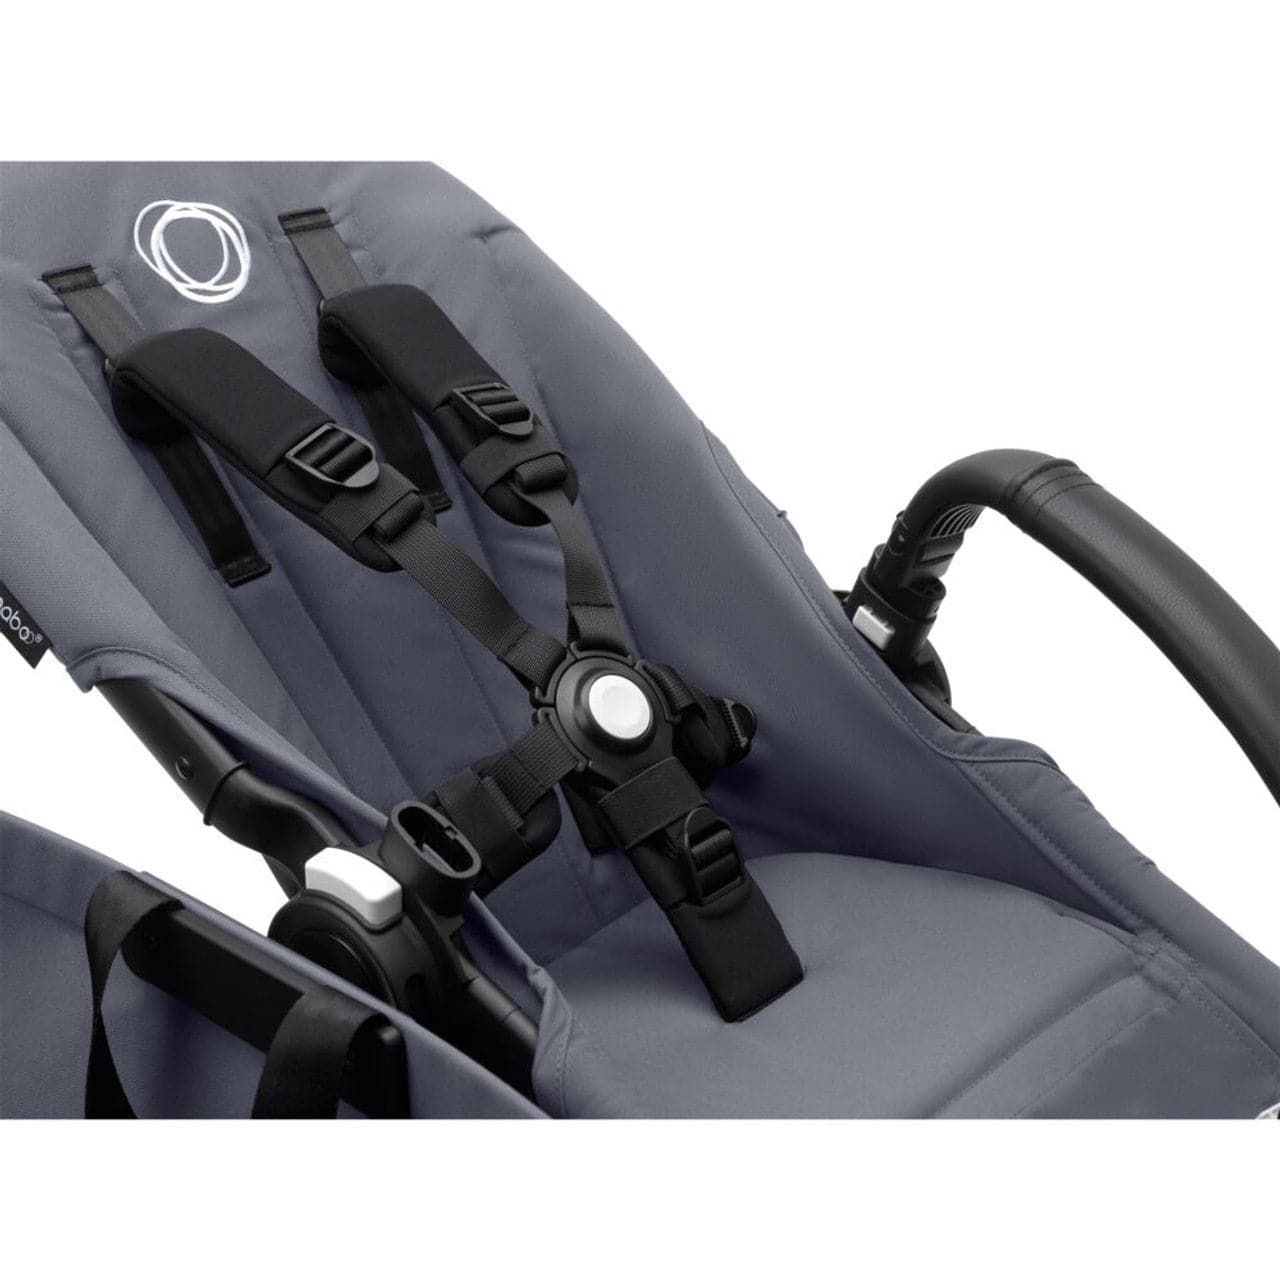 Bugaboo Donkey 5 Twin Pushchair on Black/Grey Chassis - Choose Your Colour -  | For Your Little One